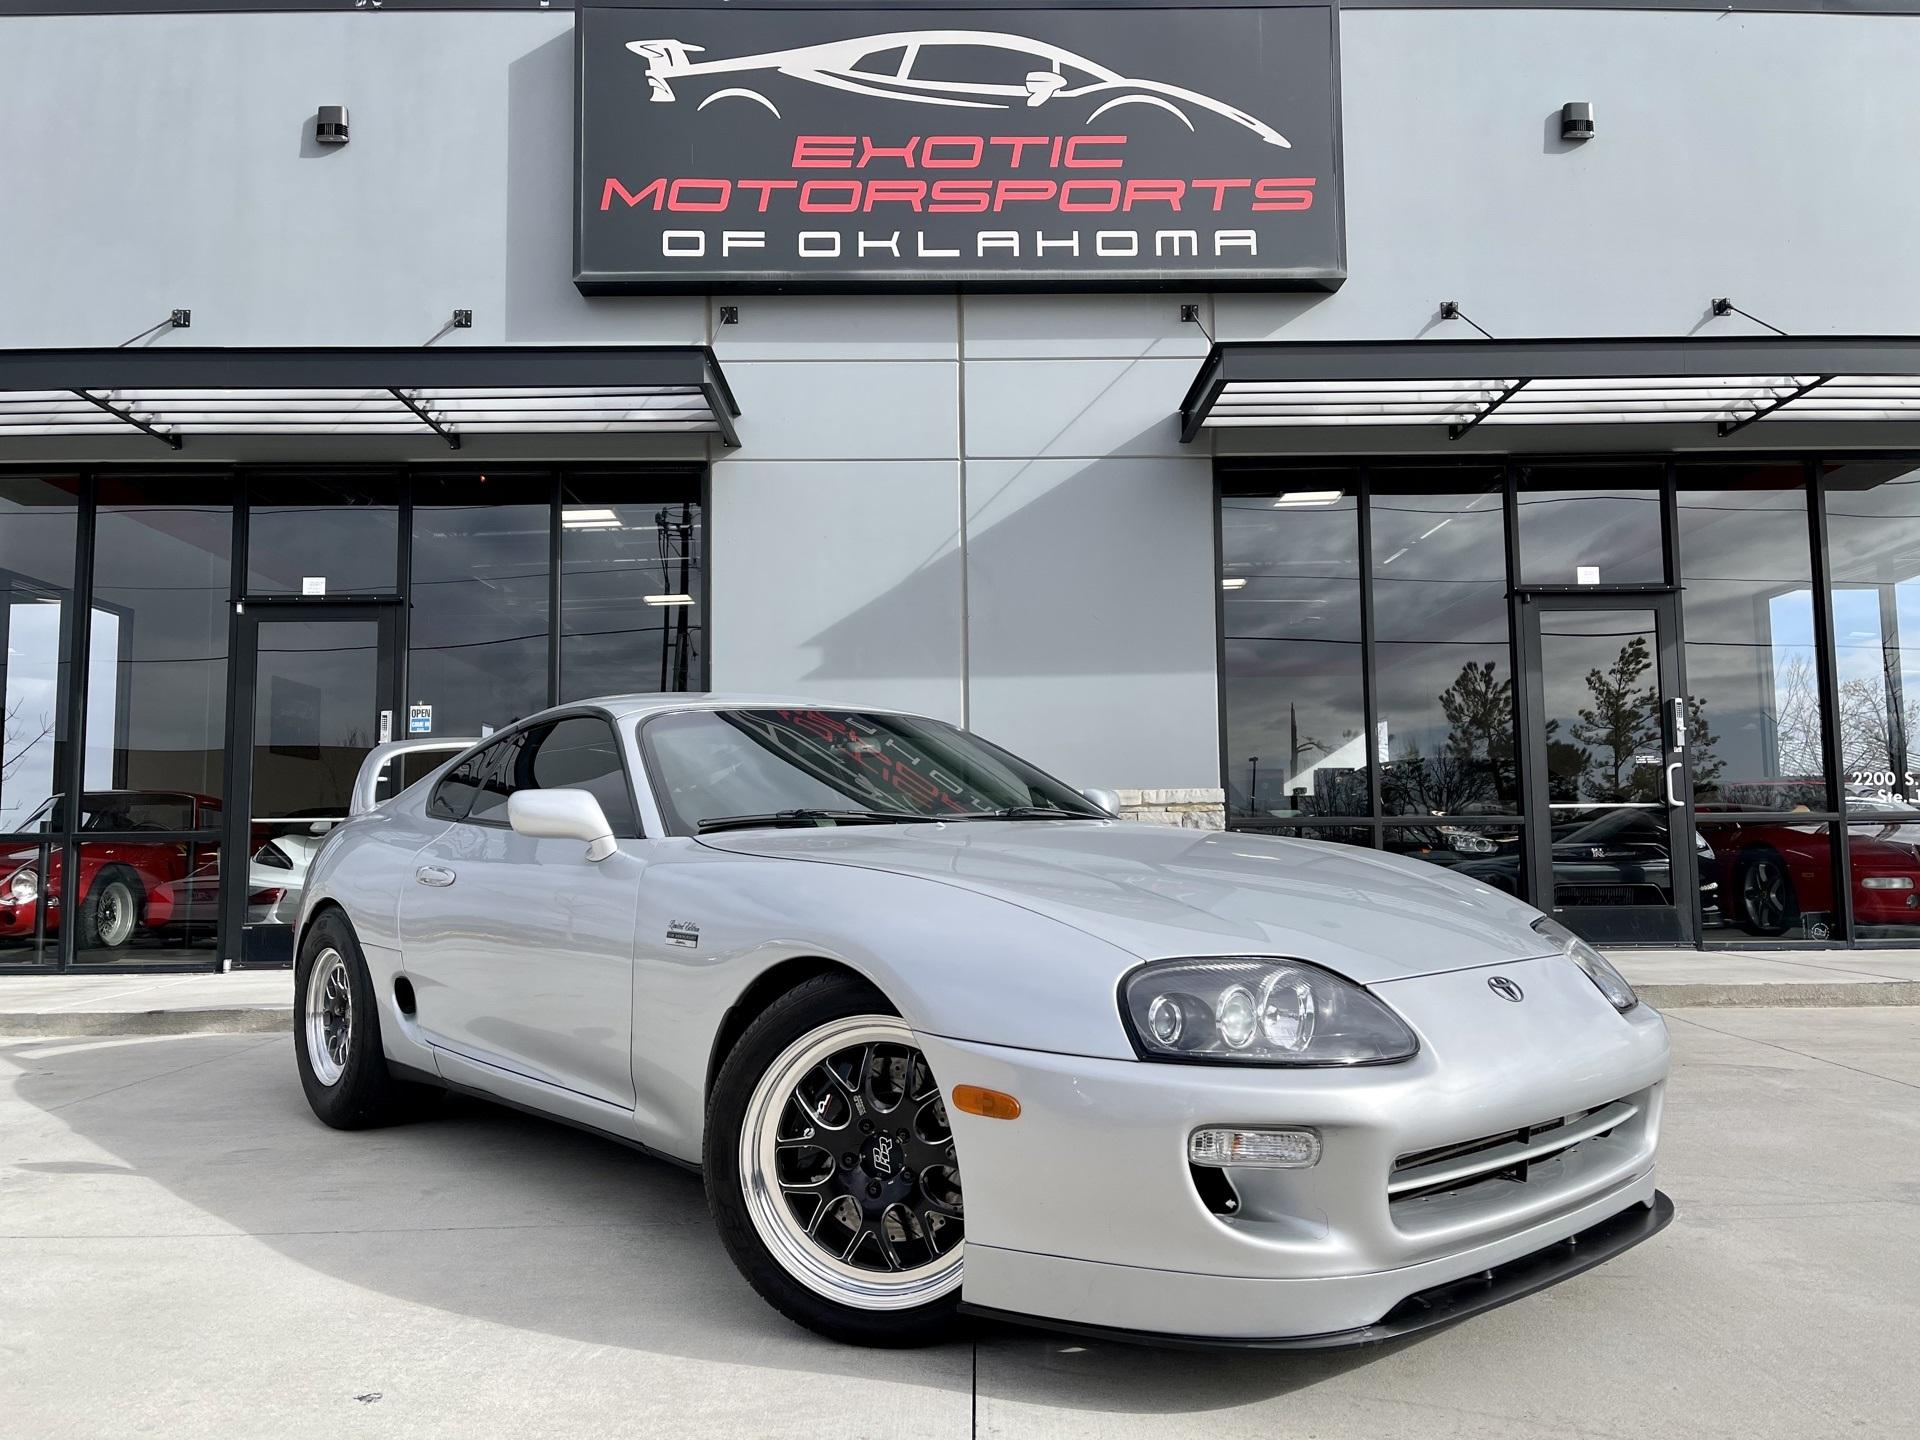 This MkIV Toyota Supra Went From Drag Car to Street Prowler in 12